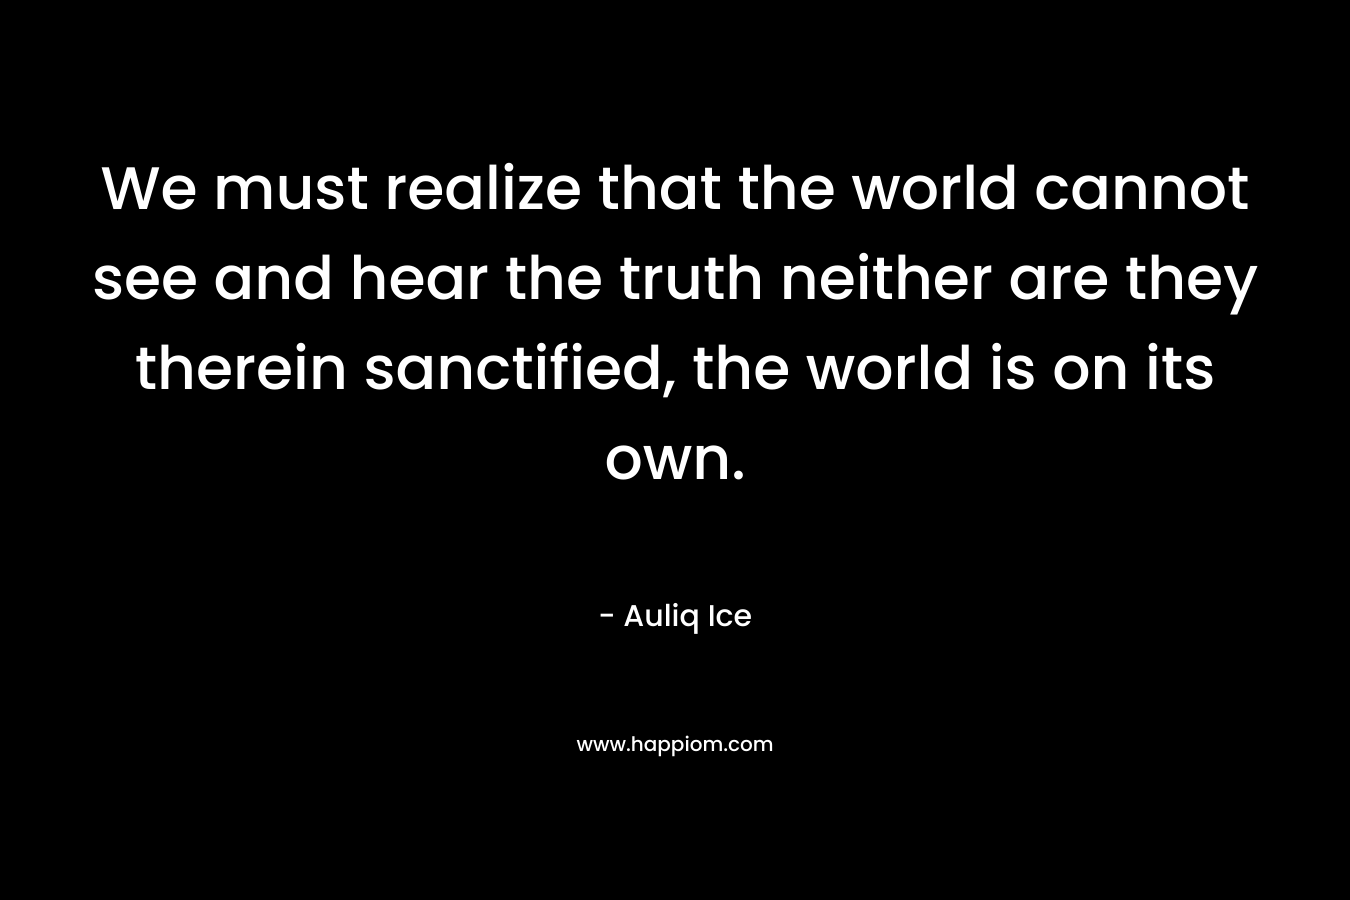 We must realize that the world cannot see and hear the truth neither are they therein sanctified, the world is on its own. – Auliq Ice